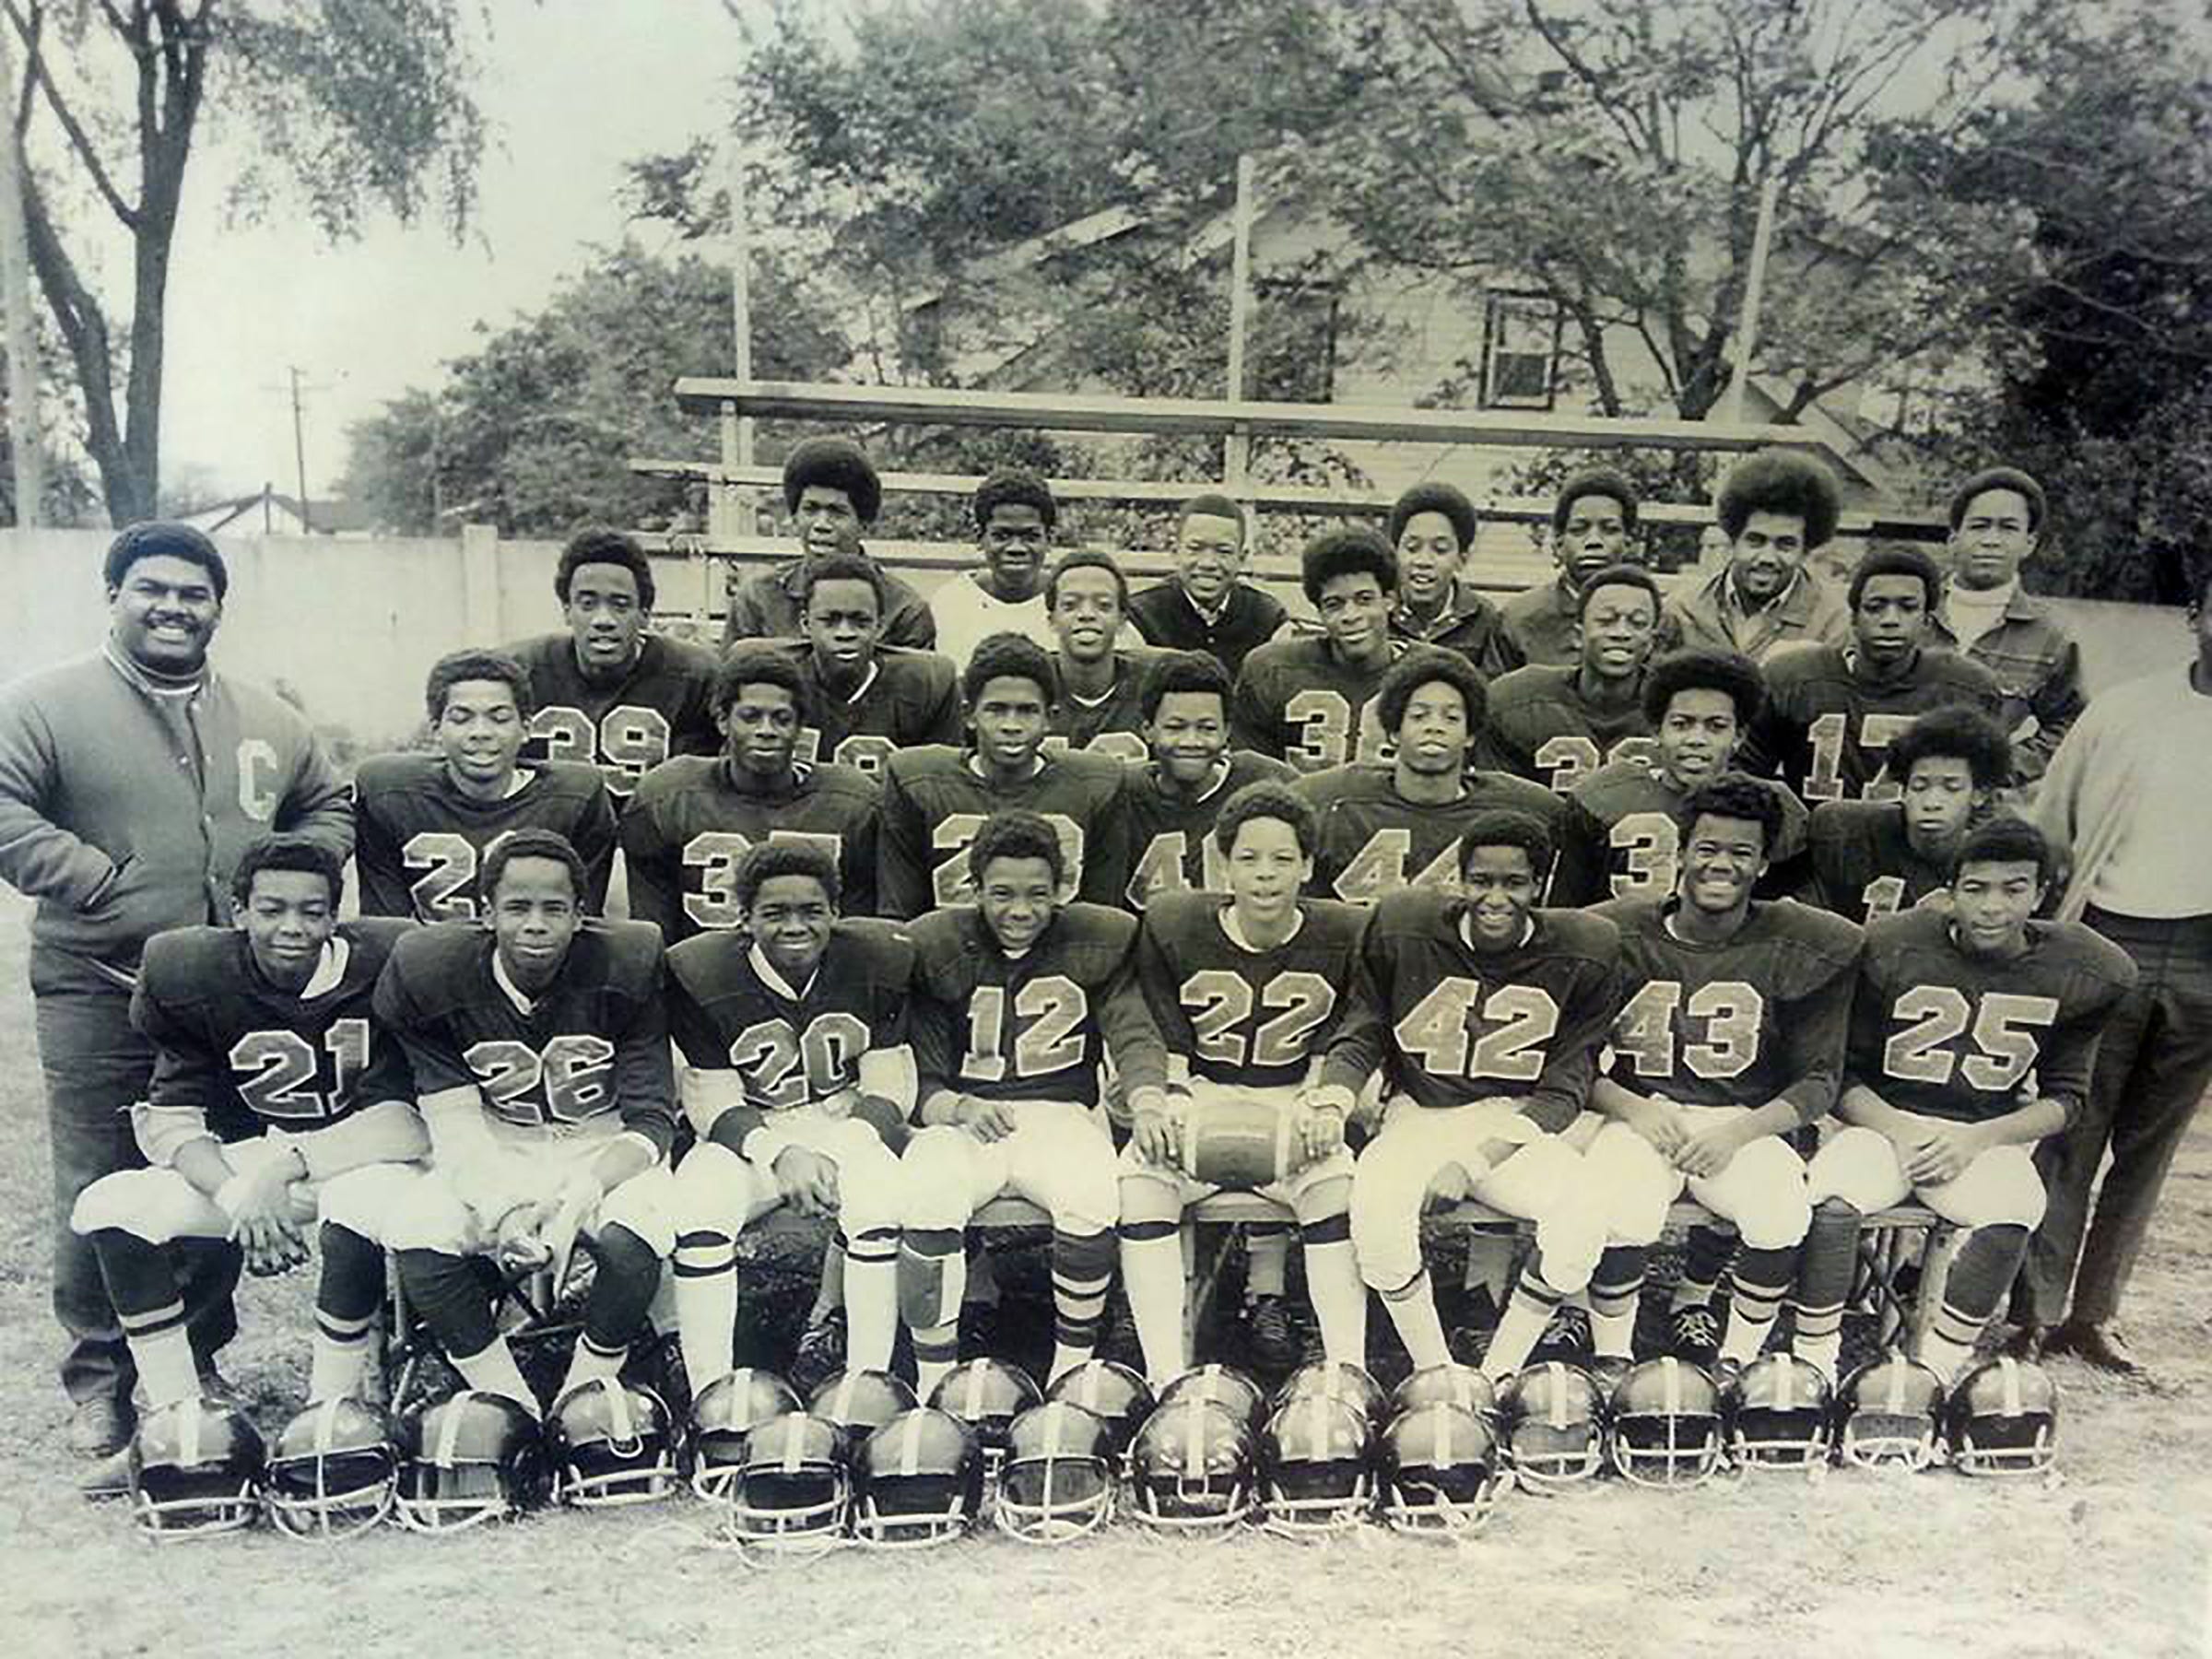 A 14-year-old Leland Stein III, wearing jersey number 22 in the front row, was a running back for the St. Cecilia Beacons. With a connection to the legendary West Side Cubs and St. Cecilia Church, Stein says the team was created by men that wanted to address a critical need in the community during the late 1960s. "My dad (Leland Jr.), Sam Washington, Jocko Hughes and Ron Thompson left their beloved Cubs to provide more opportunities for young Black boys and girls," explained Stein about the team that provided an additional outlet for Detroit youngsters and complemented the respected youth programs established by the West Side Cubs.